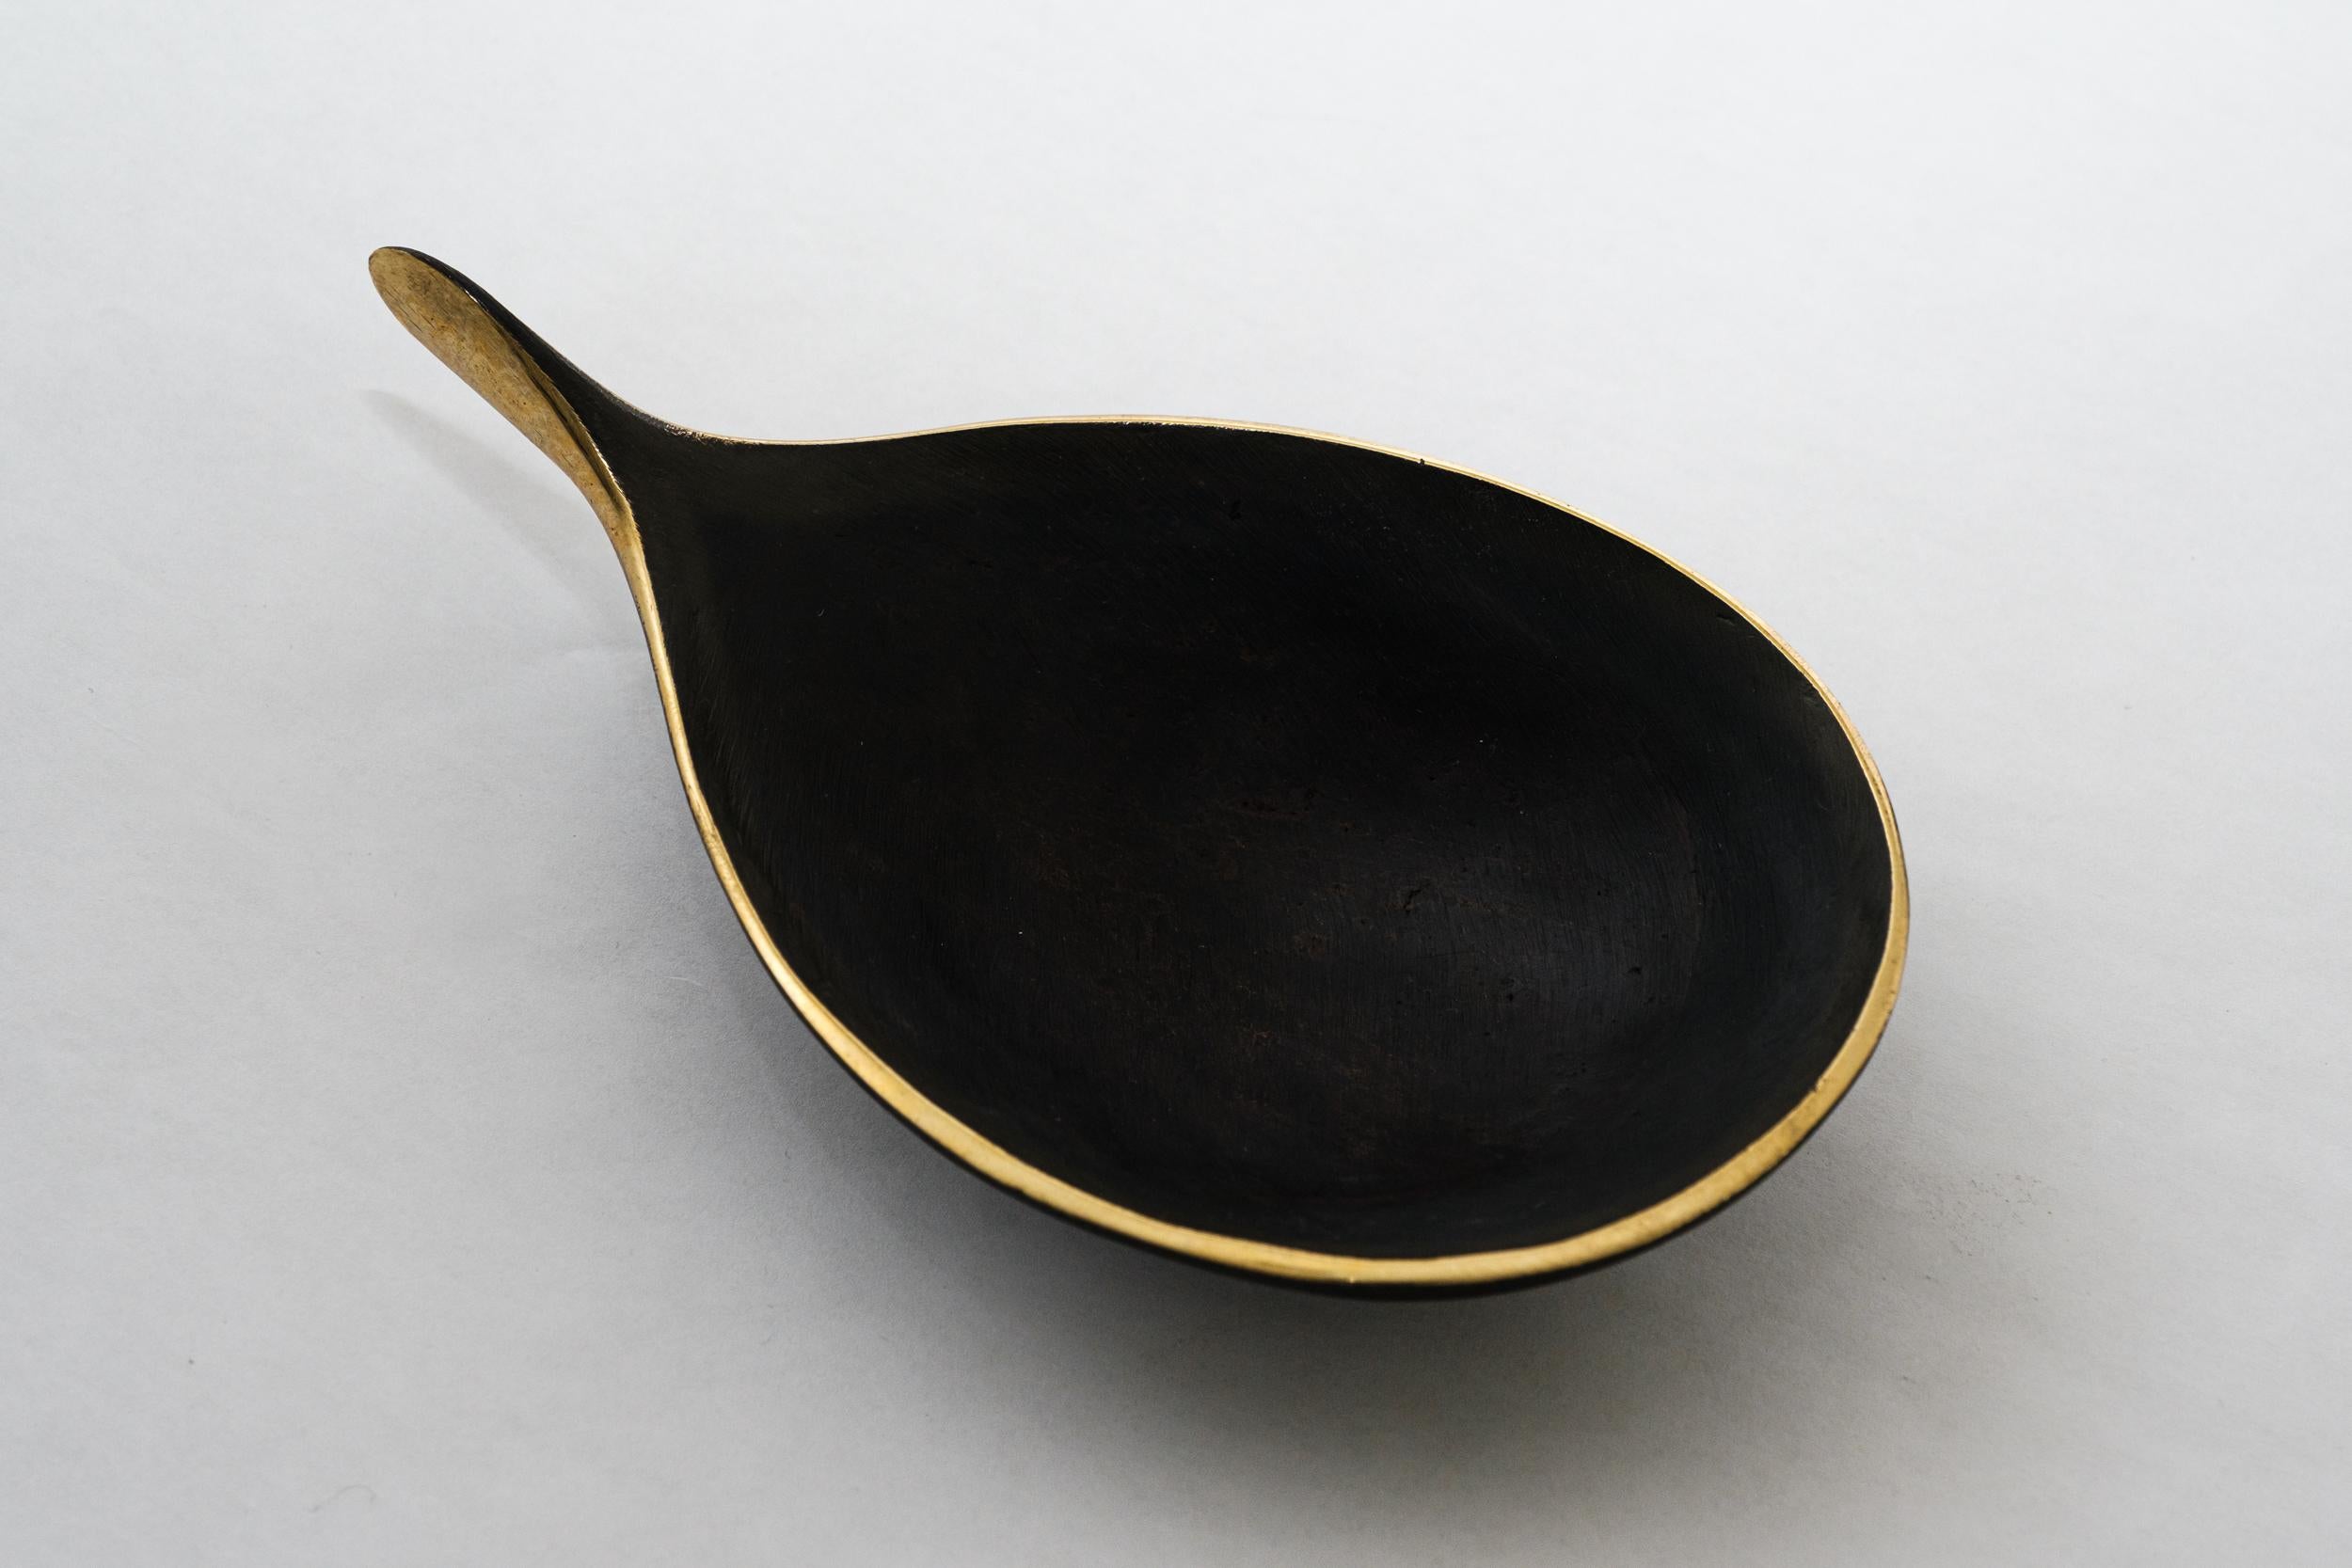 Carl Auböck Model #4208 patinated brass bowl. Designed in the 1950s, this incredibly refined and sculptural Viennese bowl is executed in polished and darkly patinated brass. Originally conceived as an ashtray, this decorative vessel can be used for